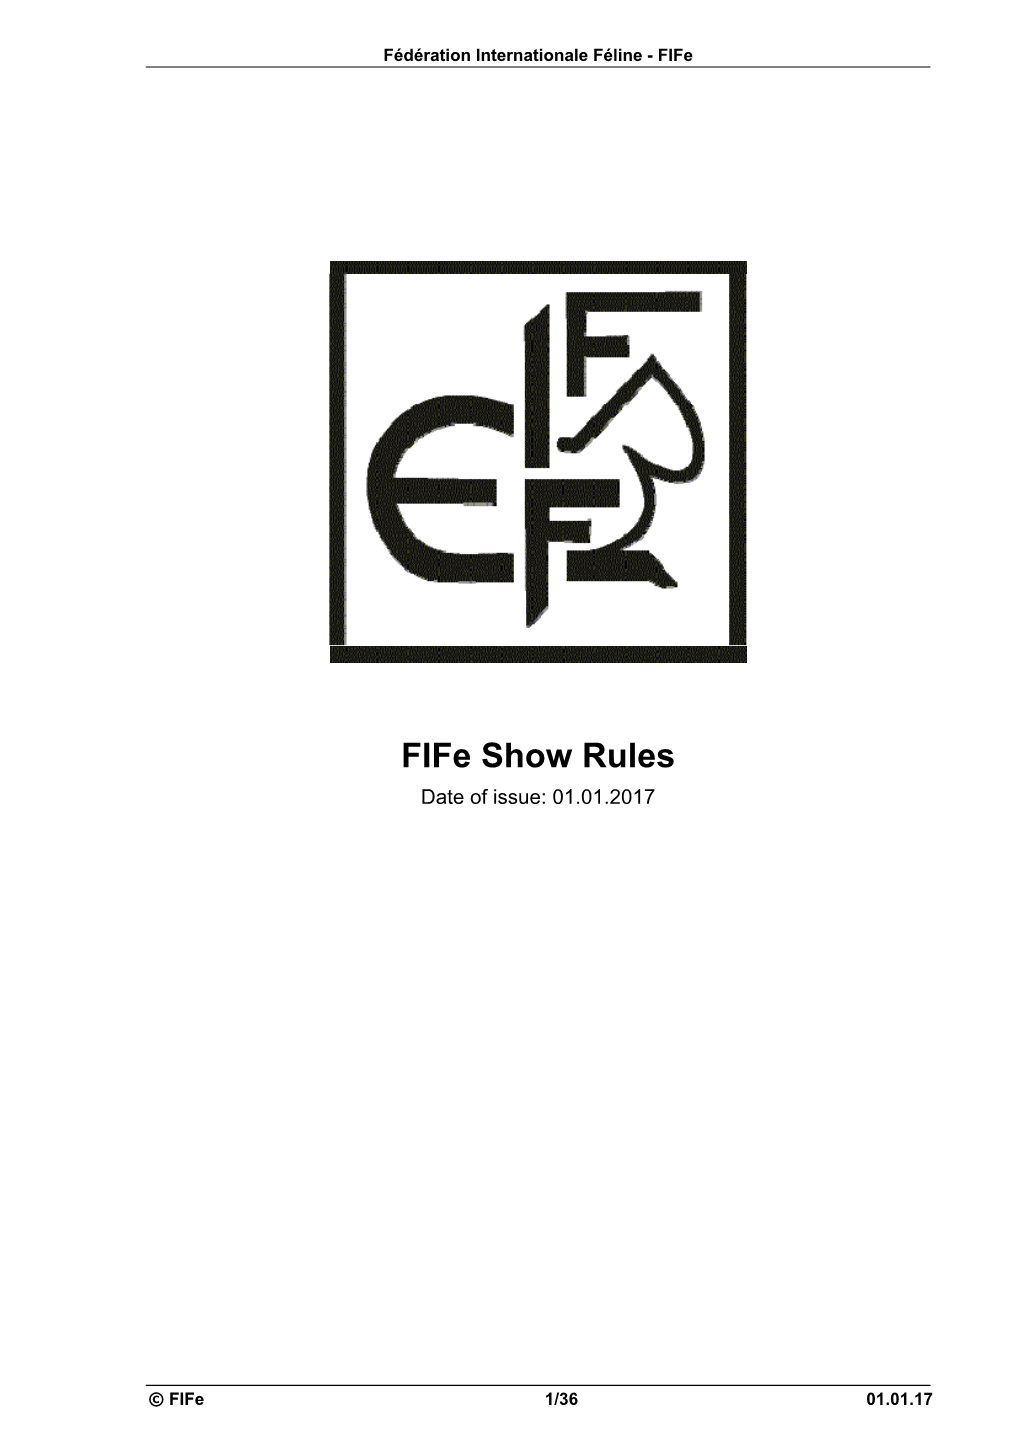 Fife Show Rules Date of Issue: 01.01.2017